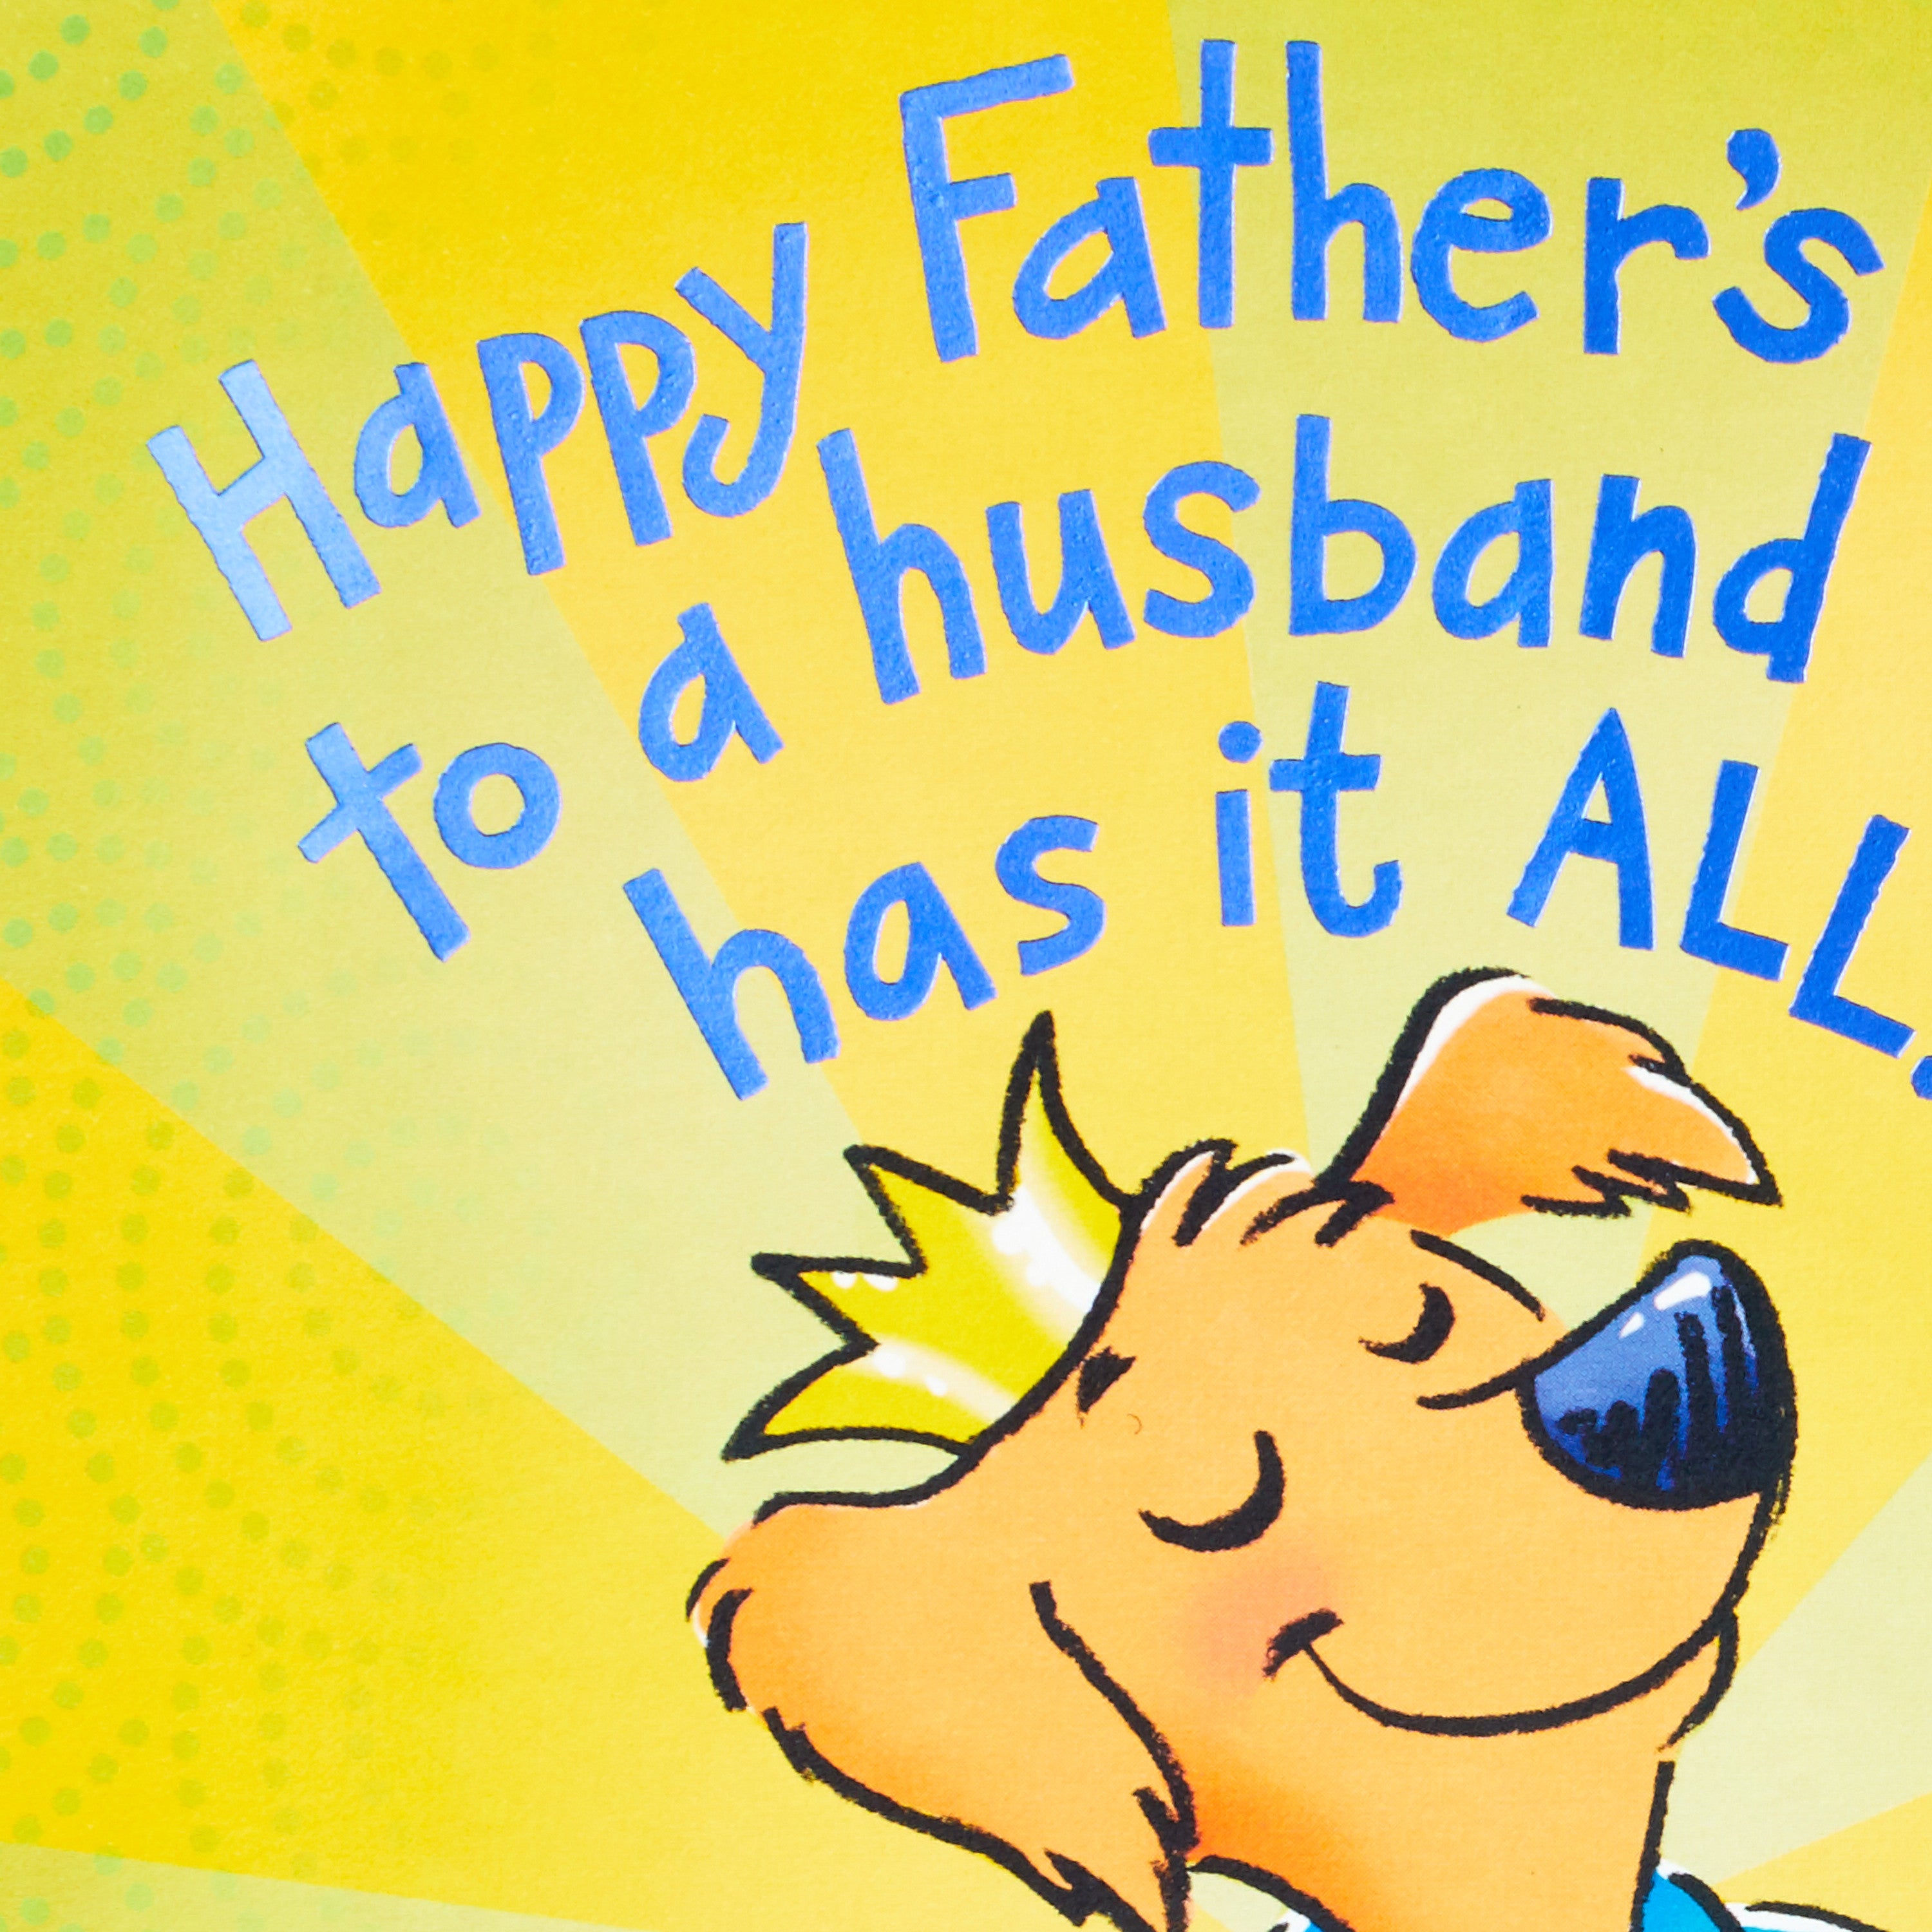 Funny Fathers Day Card for Husband (Husband Who Has It All)